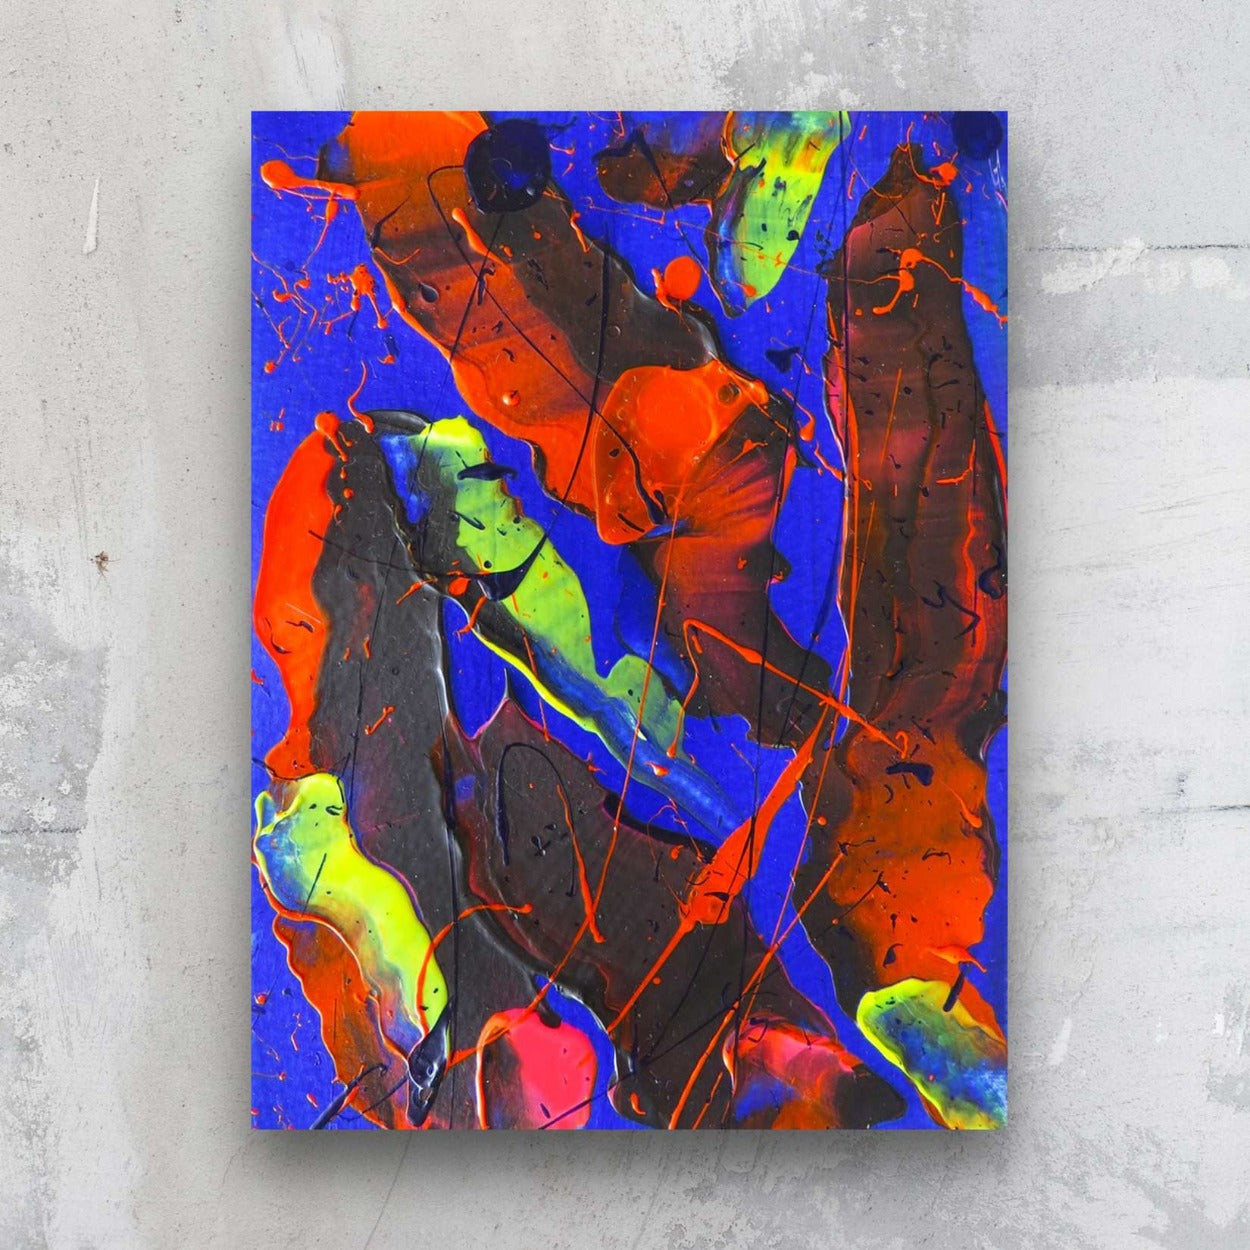 Little Luxuries XI, original abstract art on paper. Bold abstract in reds, electric blue and neons yellow green. Seen hanging on grey stone wall